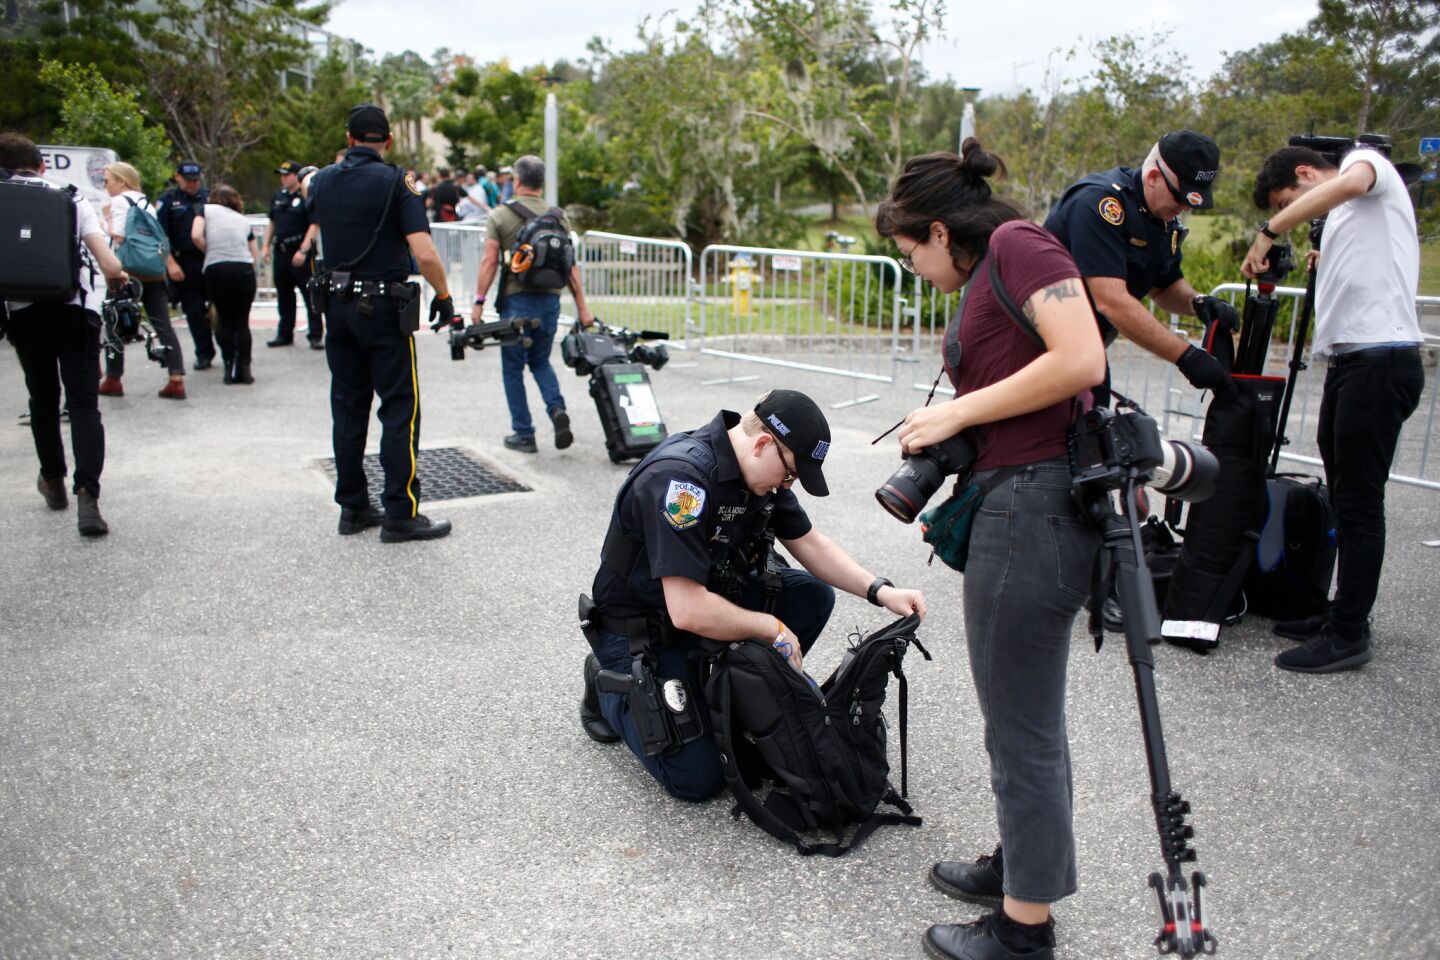 Police check the bags of journalists entering the site of the Richard Spencer event.